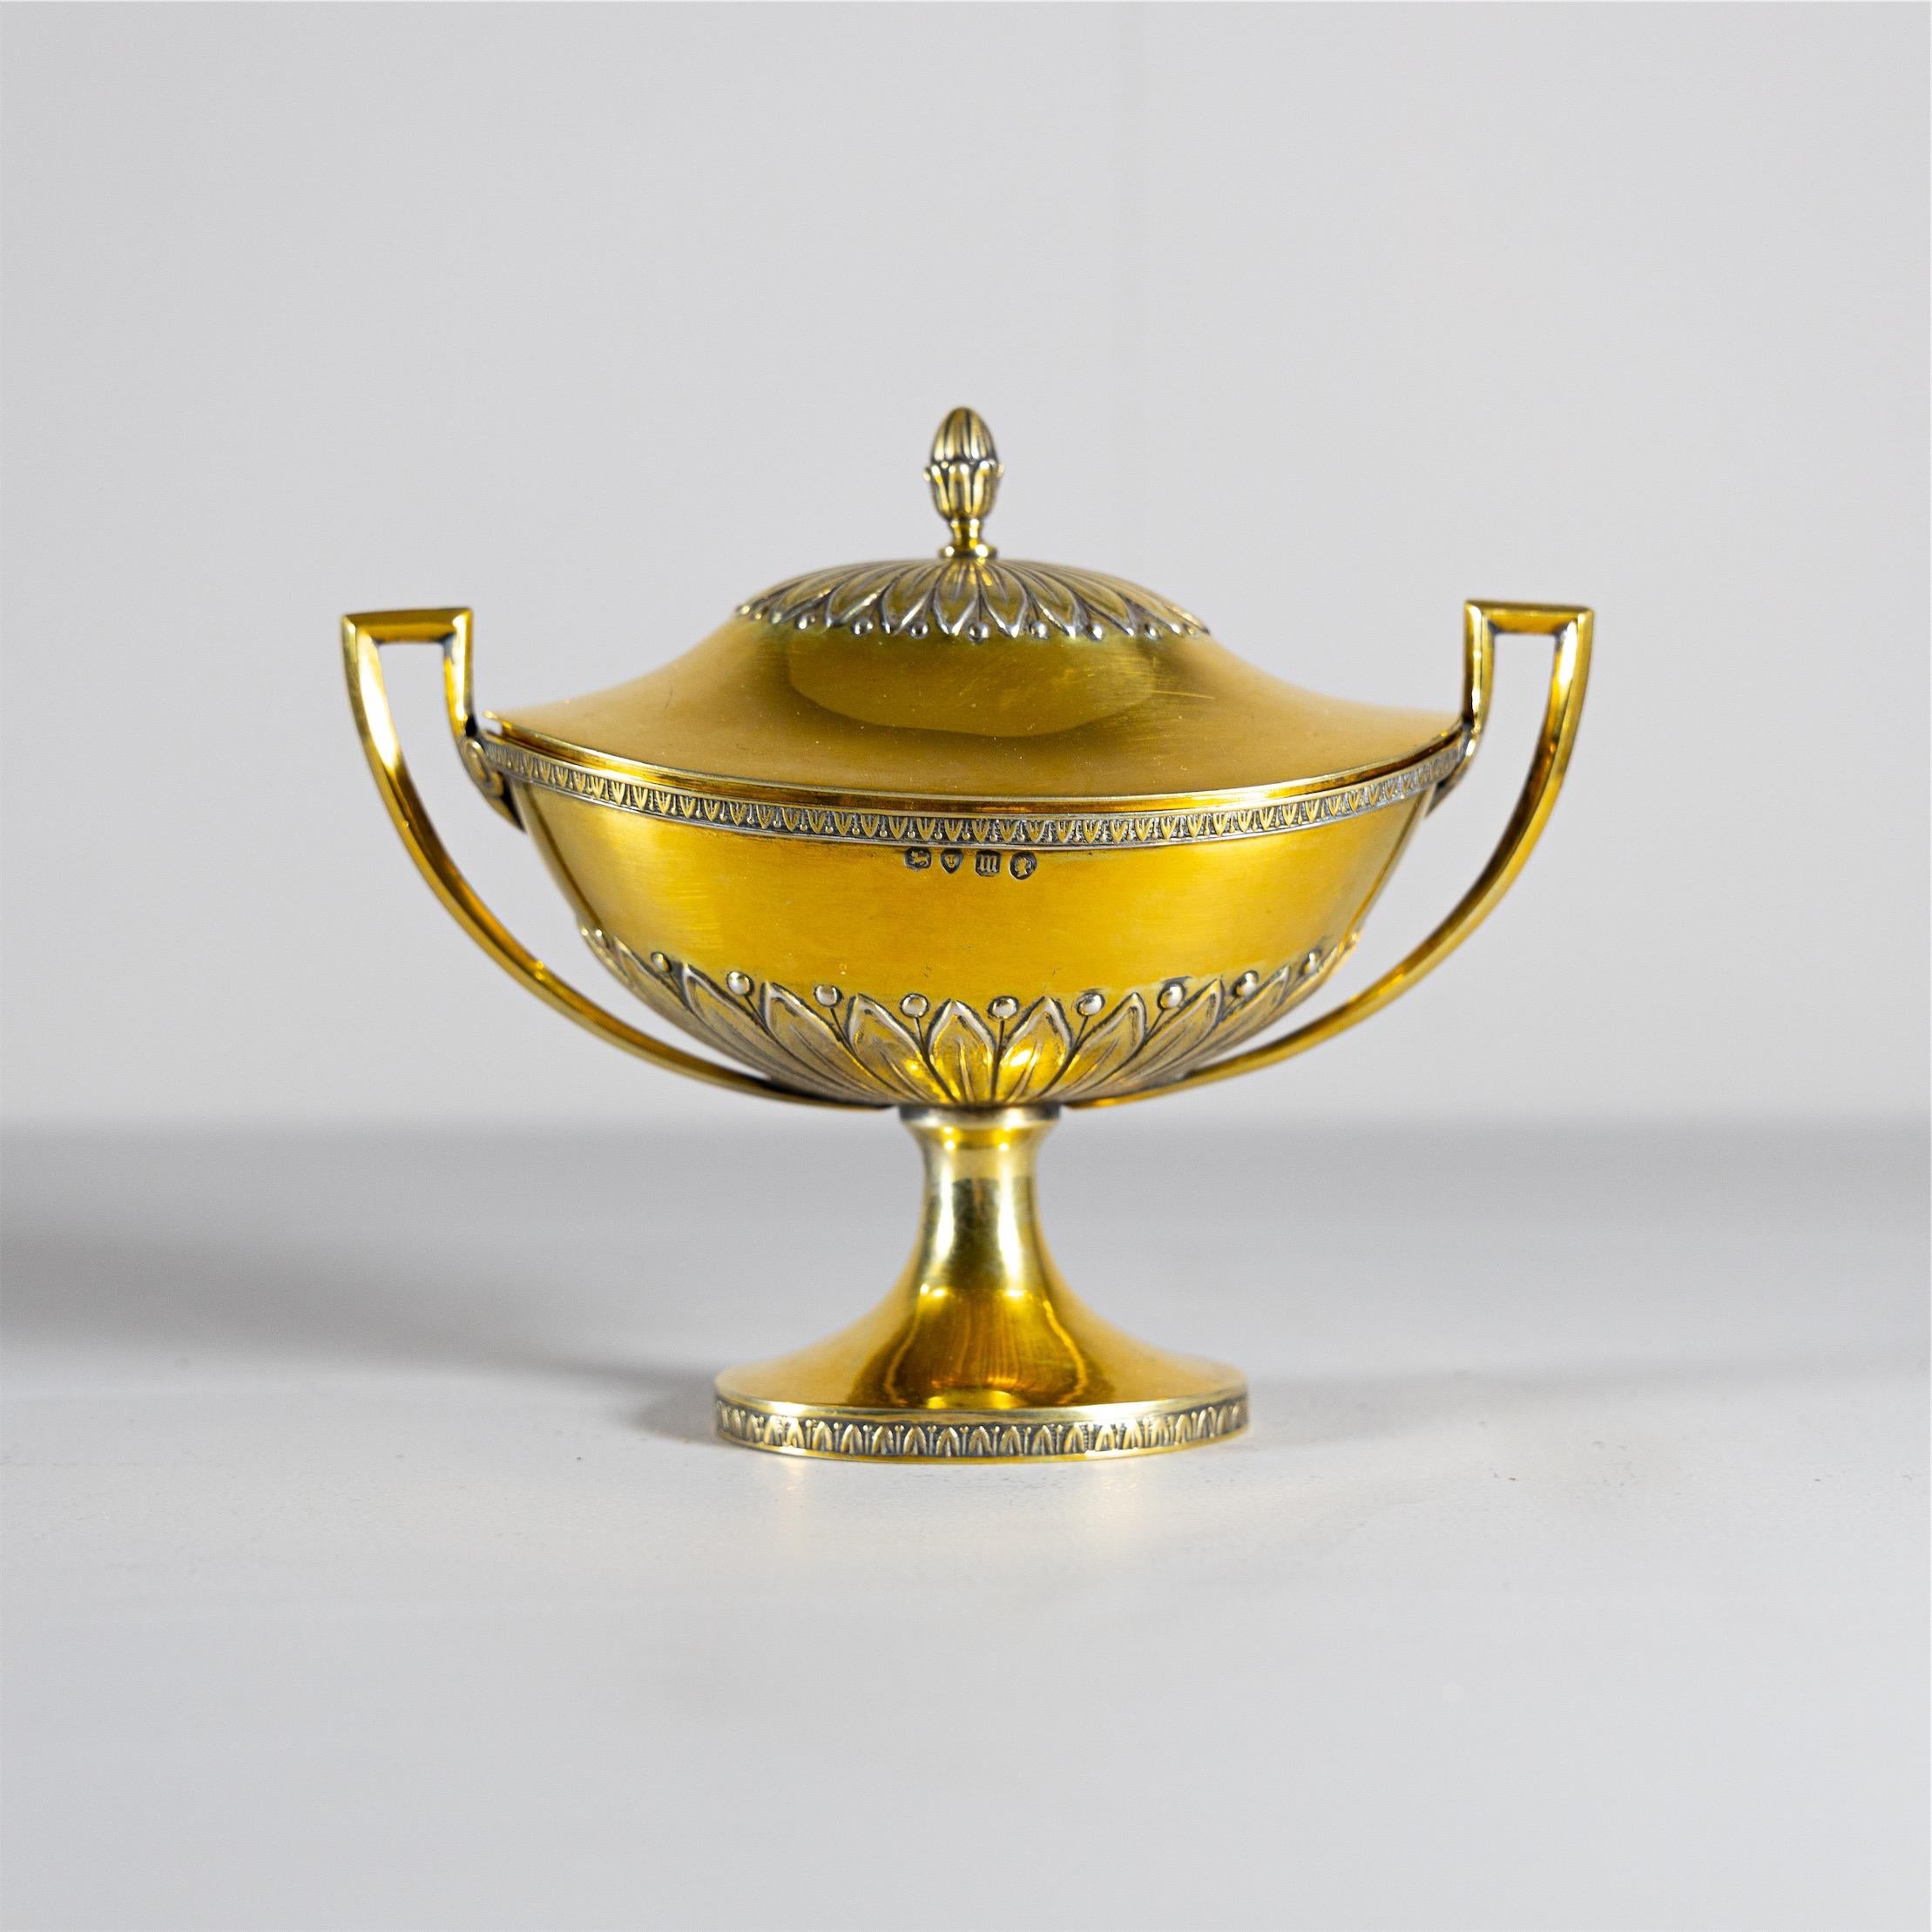 Small vermeille candy bowl with side handles and antiqued decoration. Hallmarked on the side London 1867.